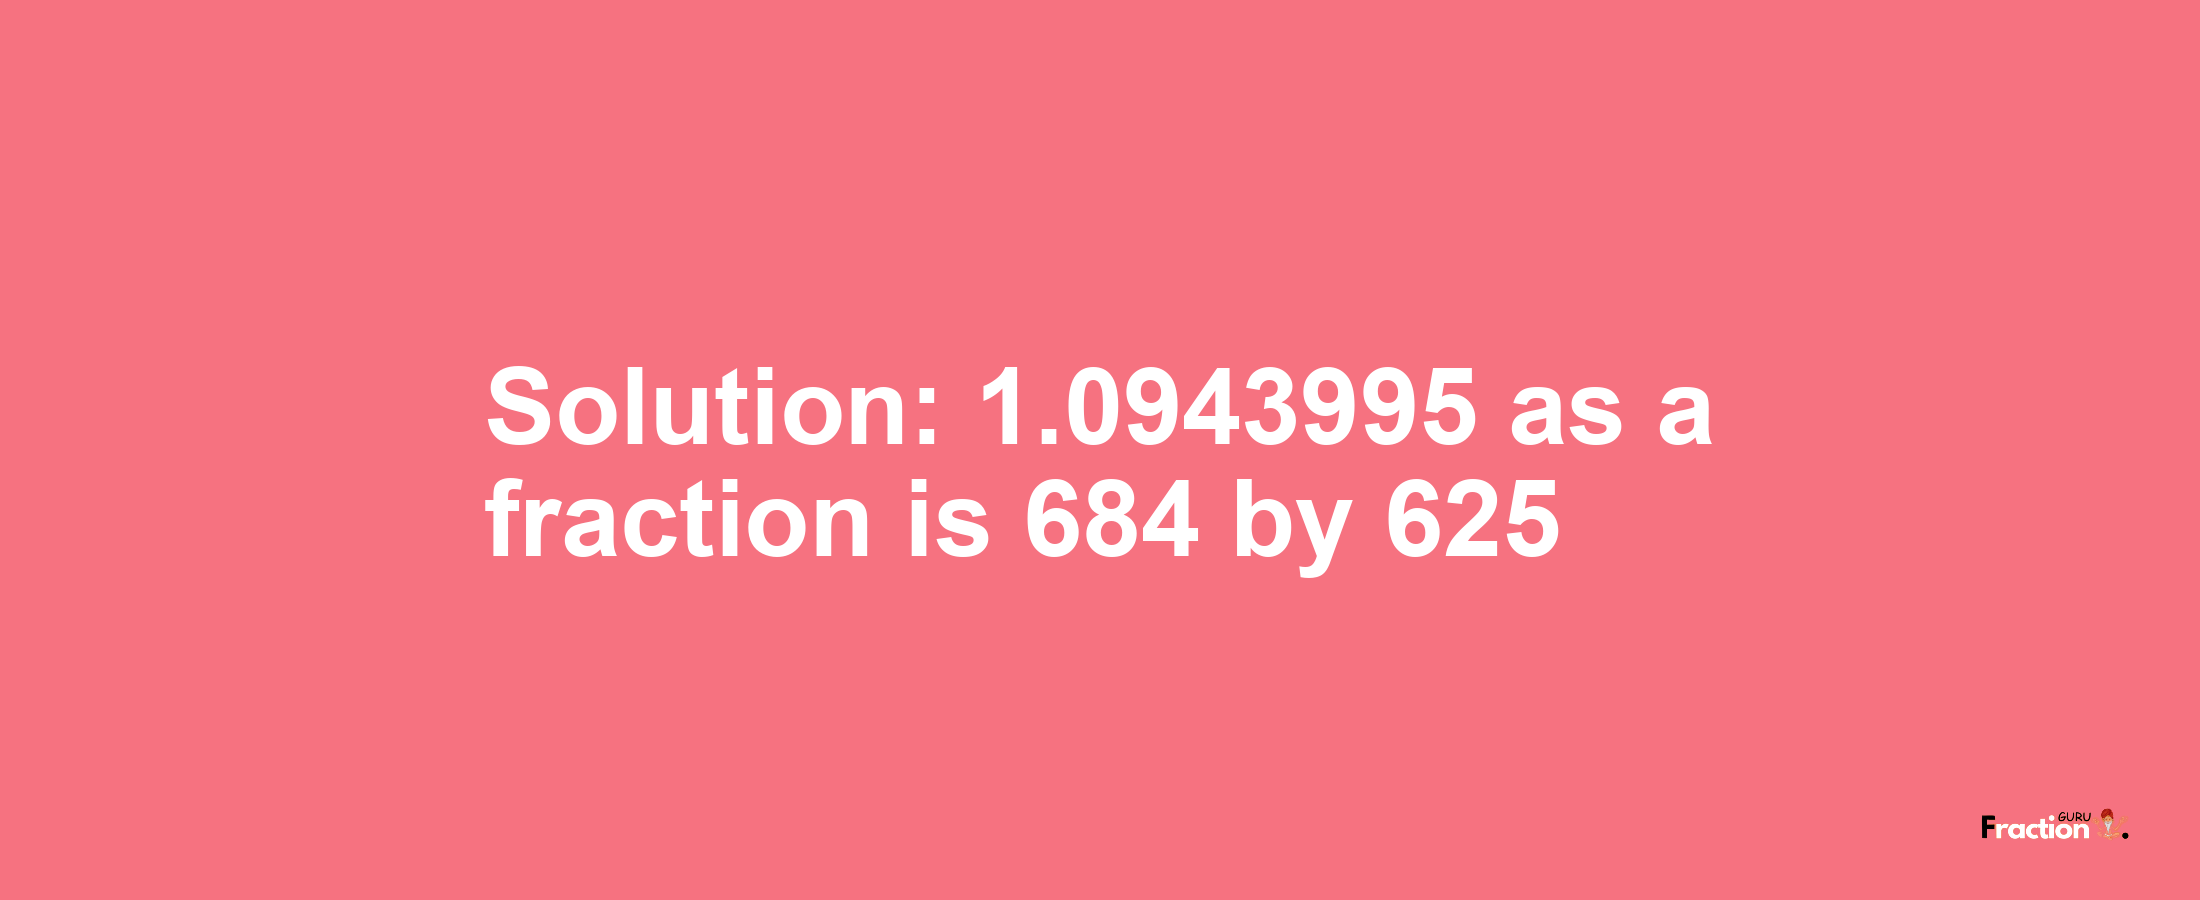 Solution:1.0943995 as a fraction is 684/625